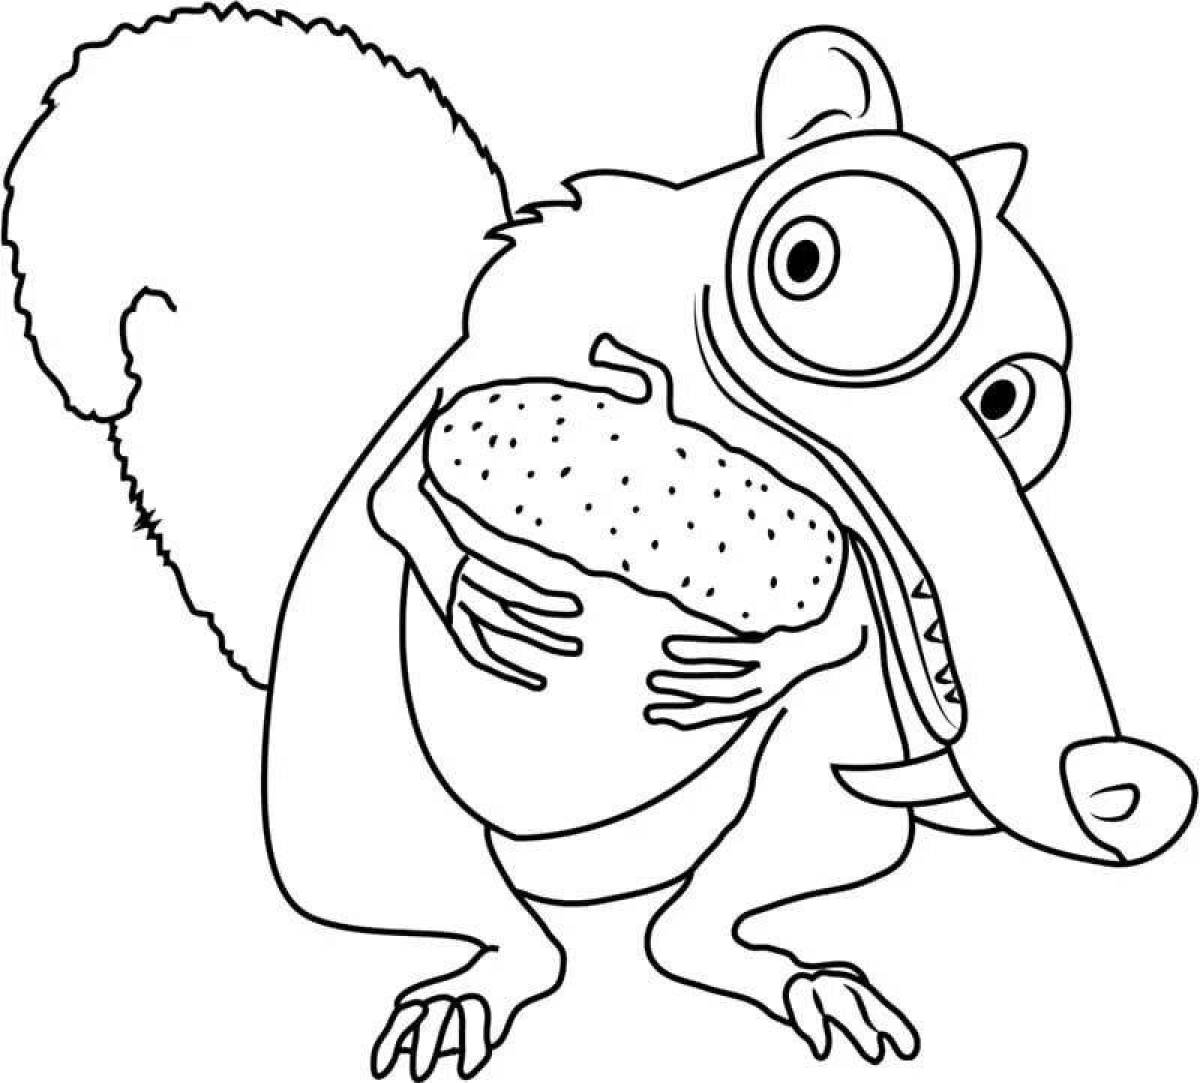 Ice age glowing squirrel coloring page